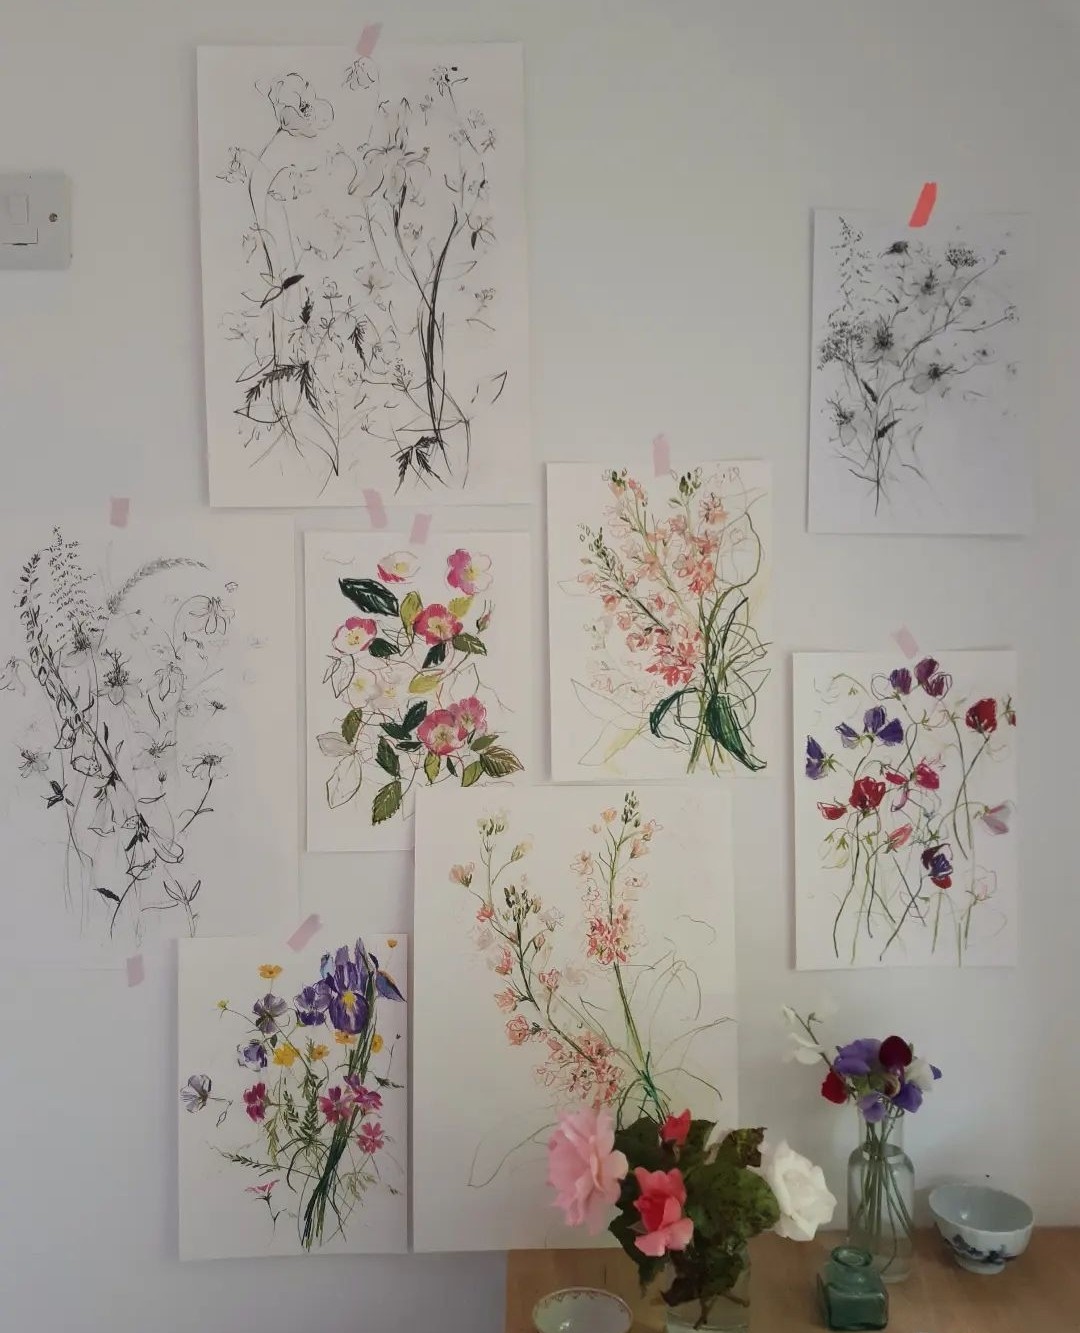 illustrations on studio wall by Claudia Lowry